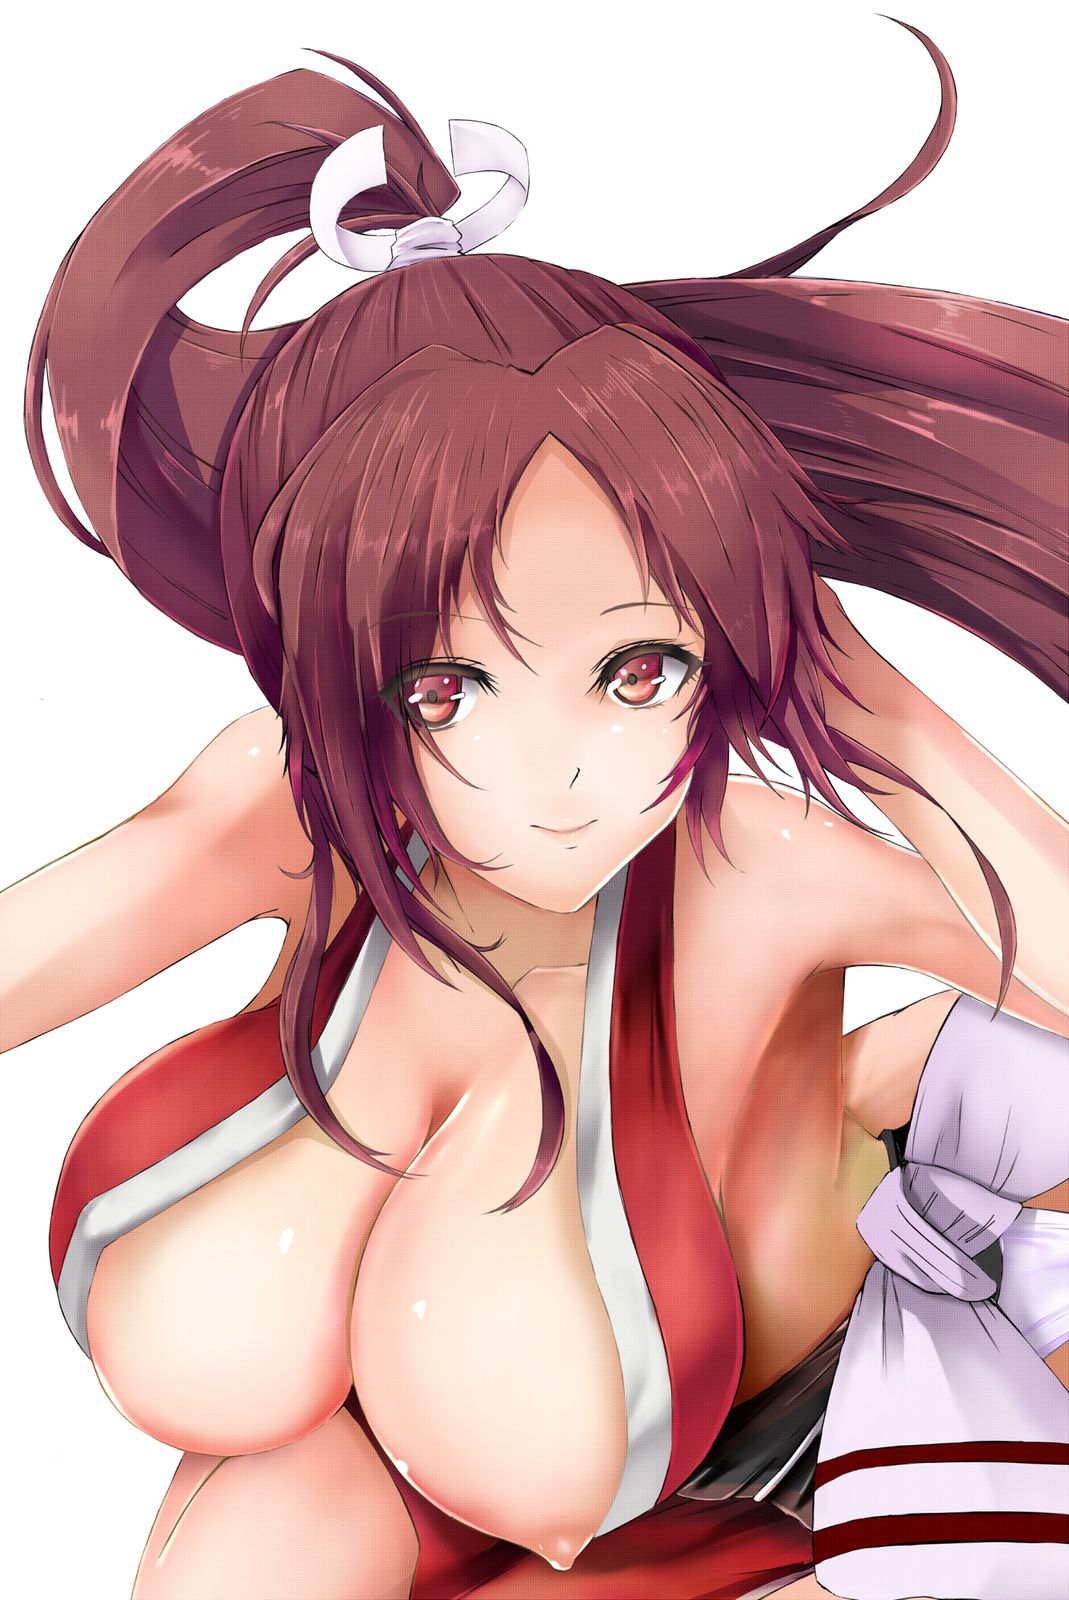 [The King of Fighters] secondary erotic image of Mai Shiranui condemning ah. 7